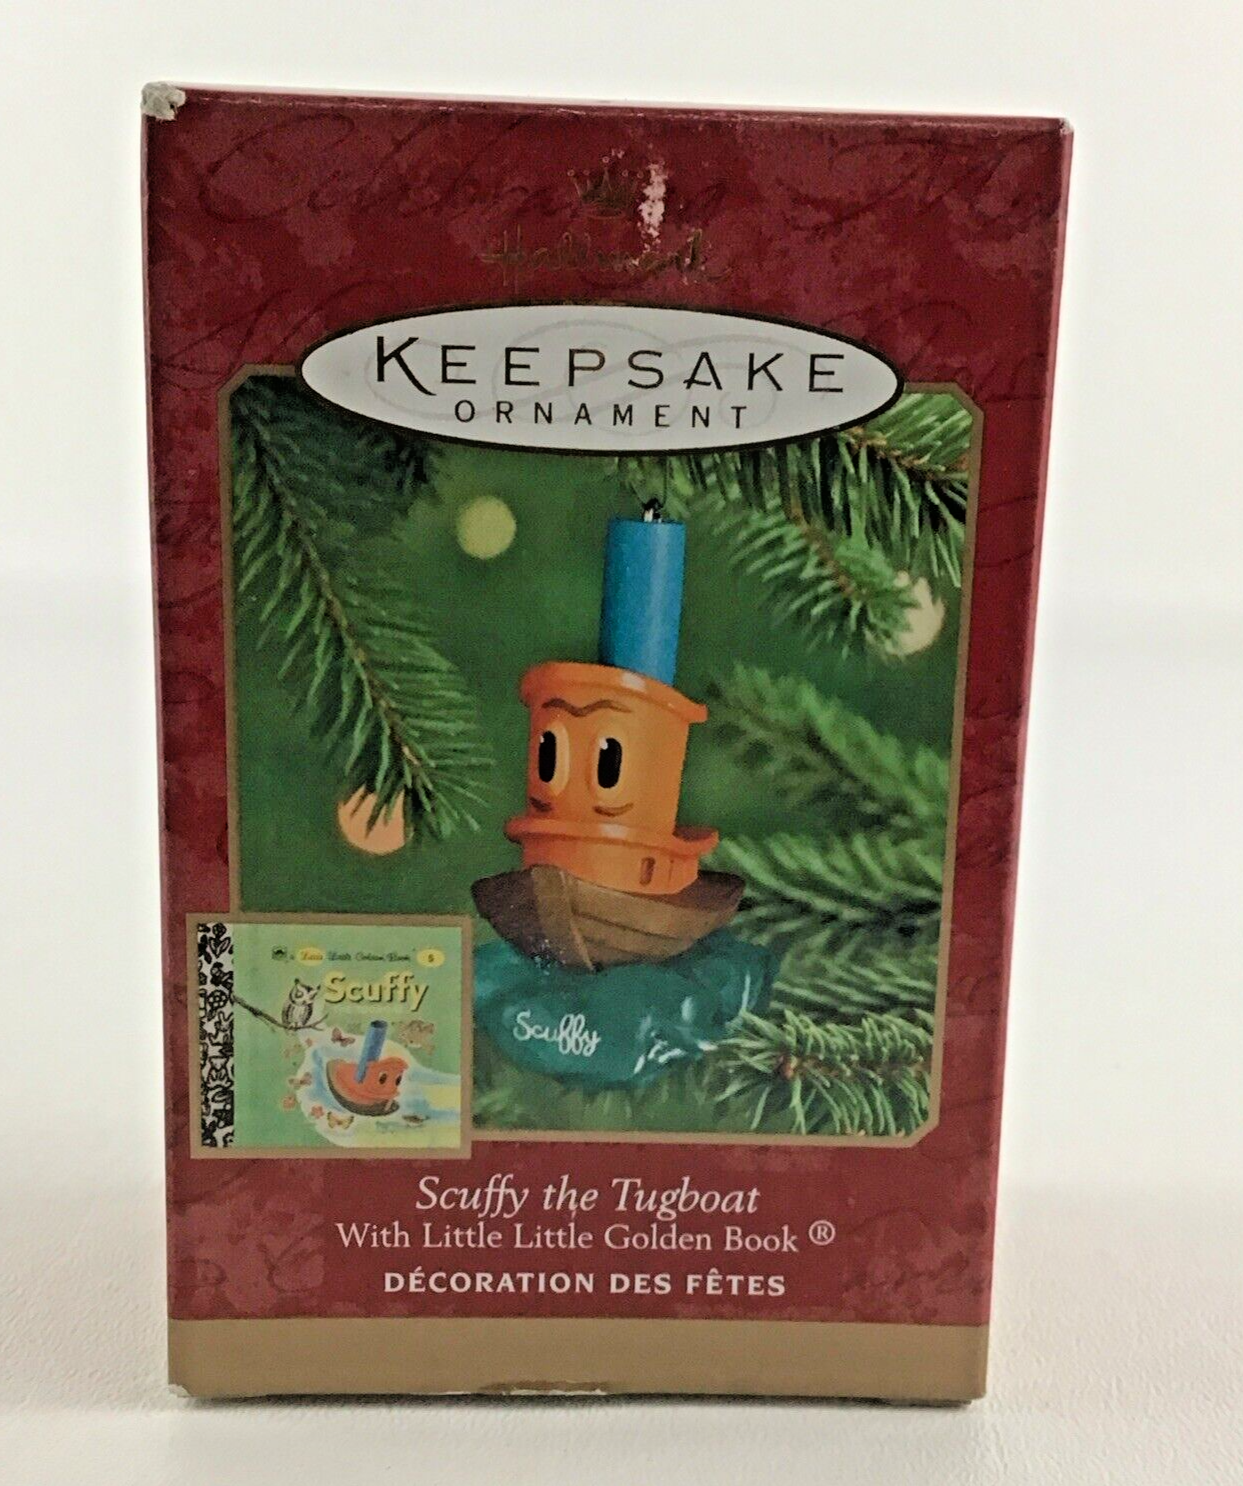 Primary image for Hallmark Keepsake Christmas Ornament Scuffy Tugboat Toy Little Golden Book 2000